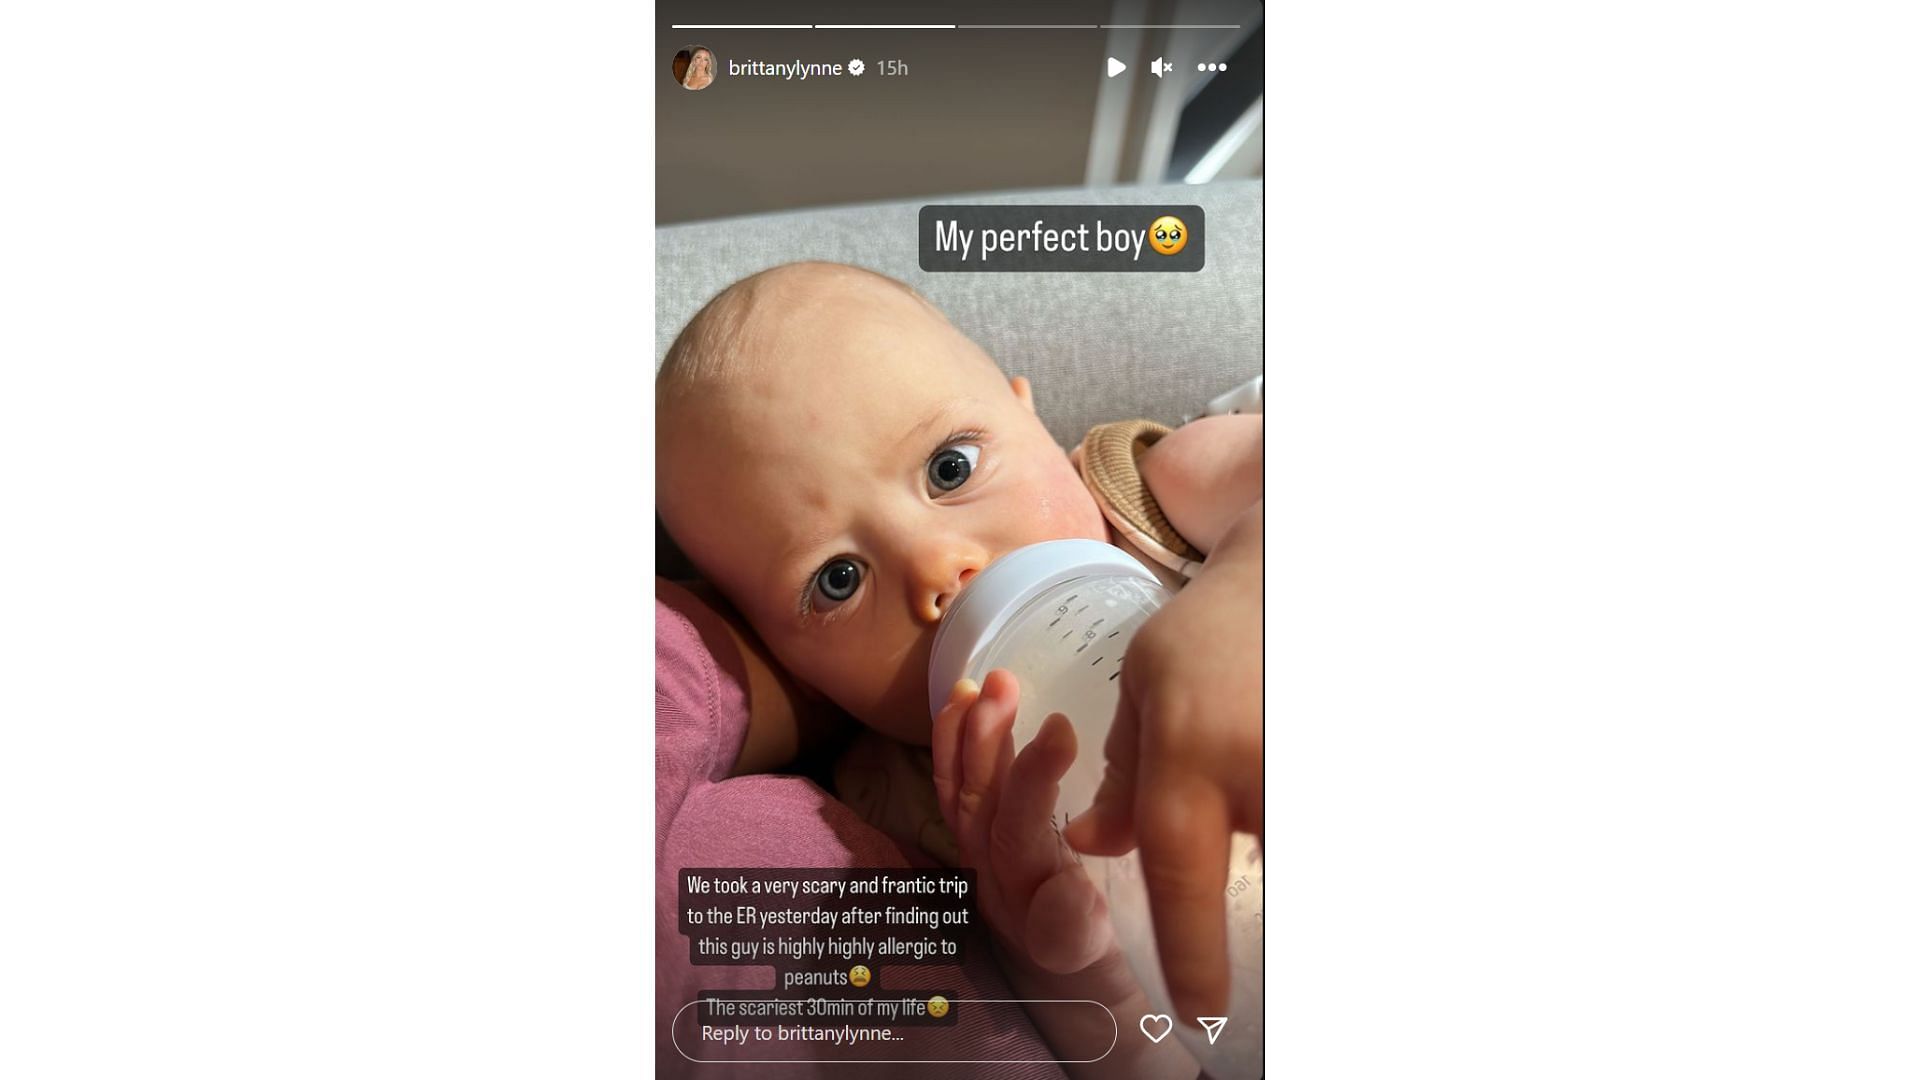 Brittany and Patrick Mahomes Rush Their Infant Son to Emergency